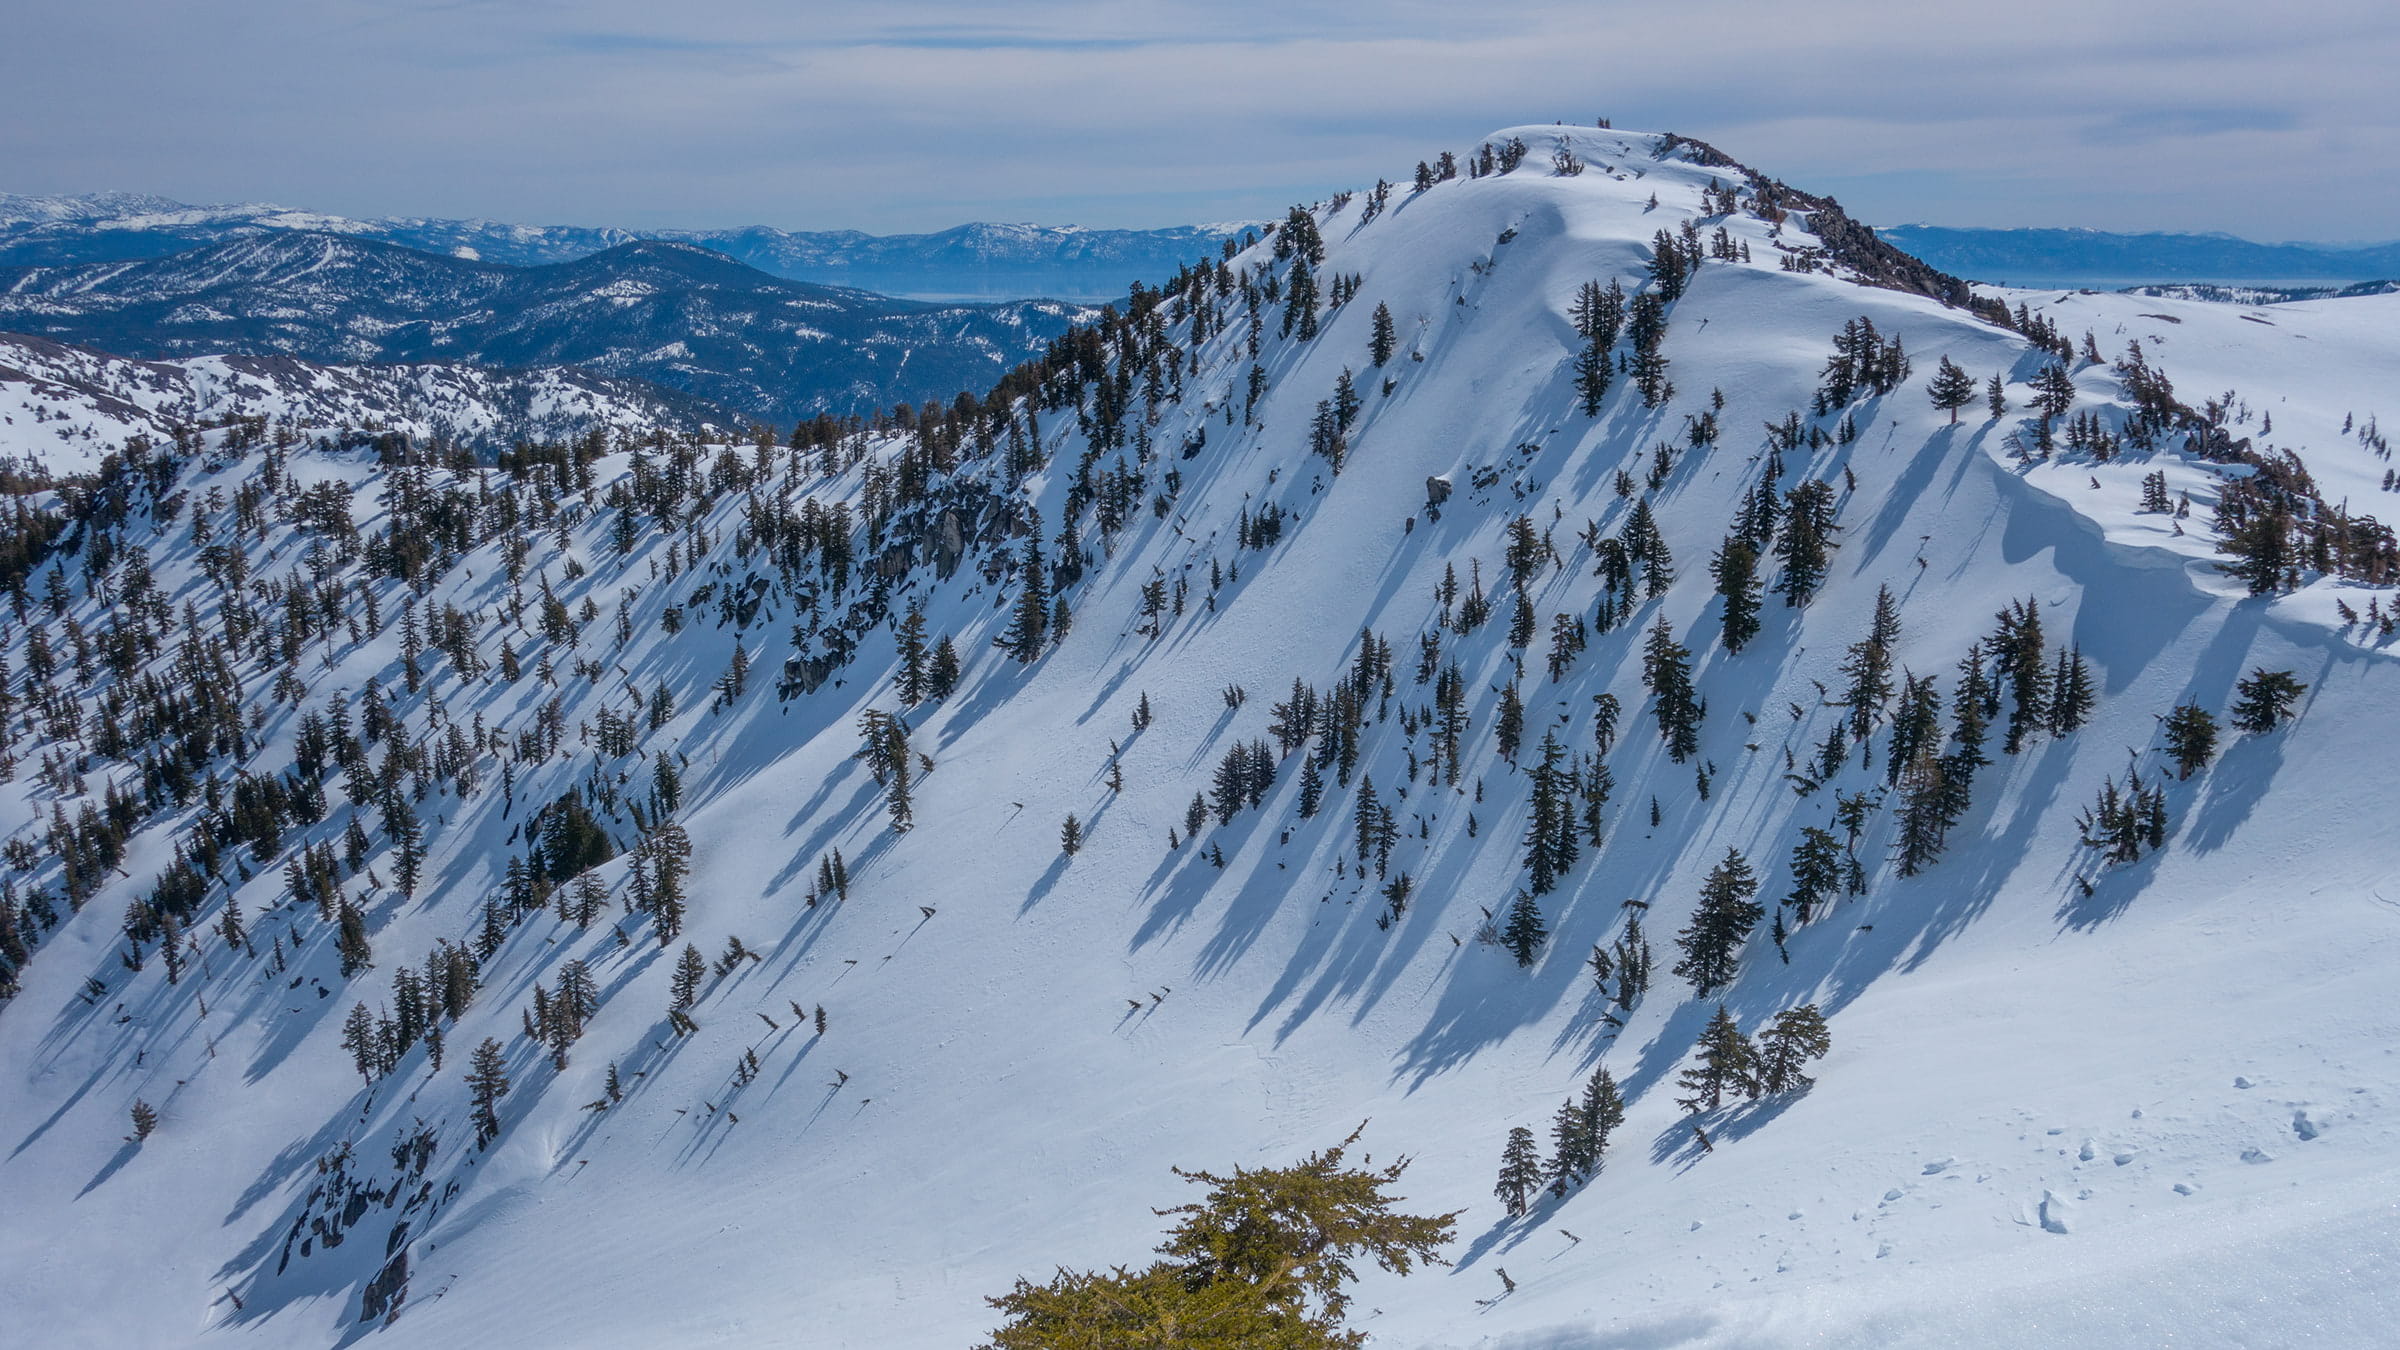 Nat Geo Bowl adjacent to Palisades Tahoe can be accessed through backcountry tours with Alpenglow Expeditions